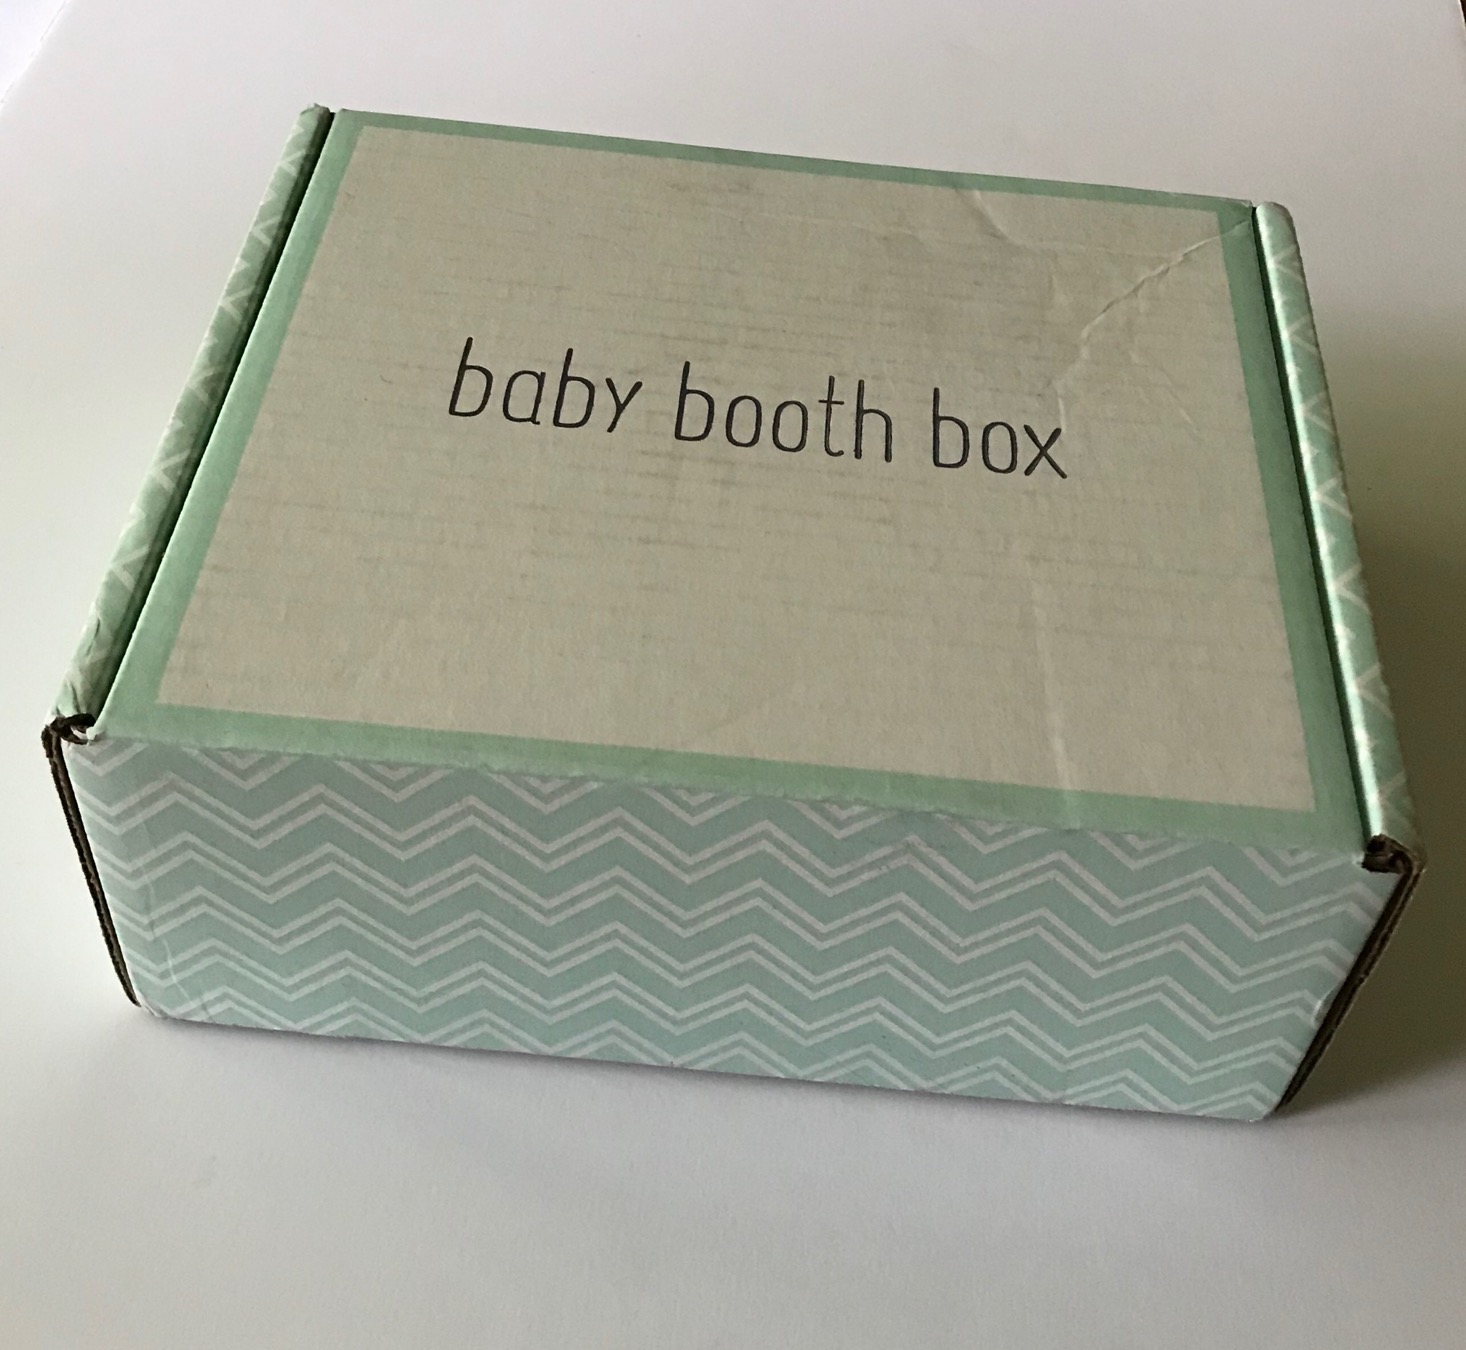 Baby Booth Box Subscription Review + Coupon – July 2018